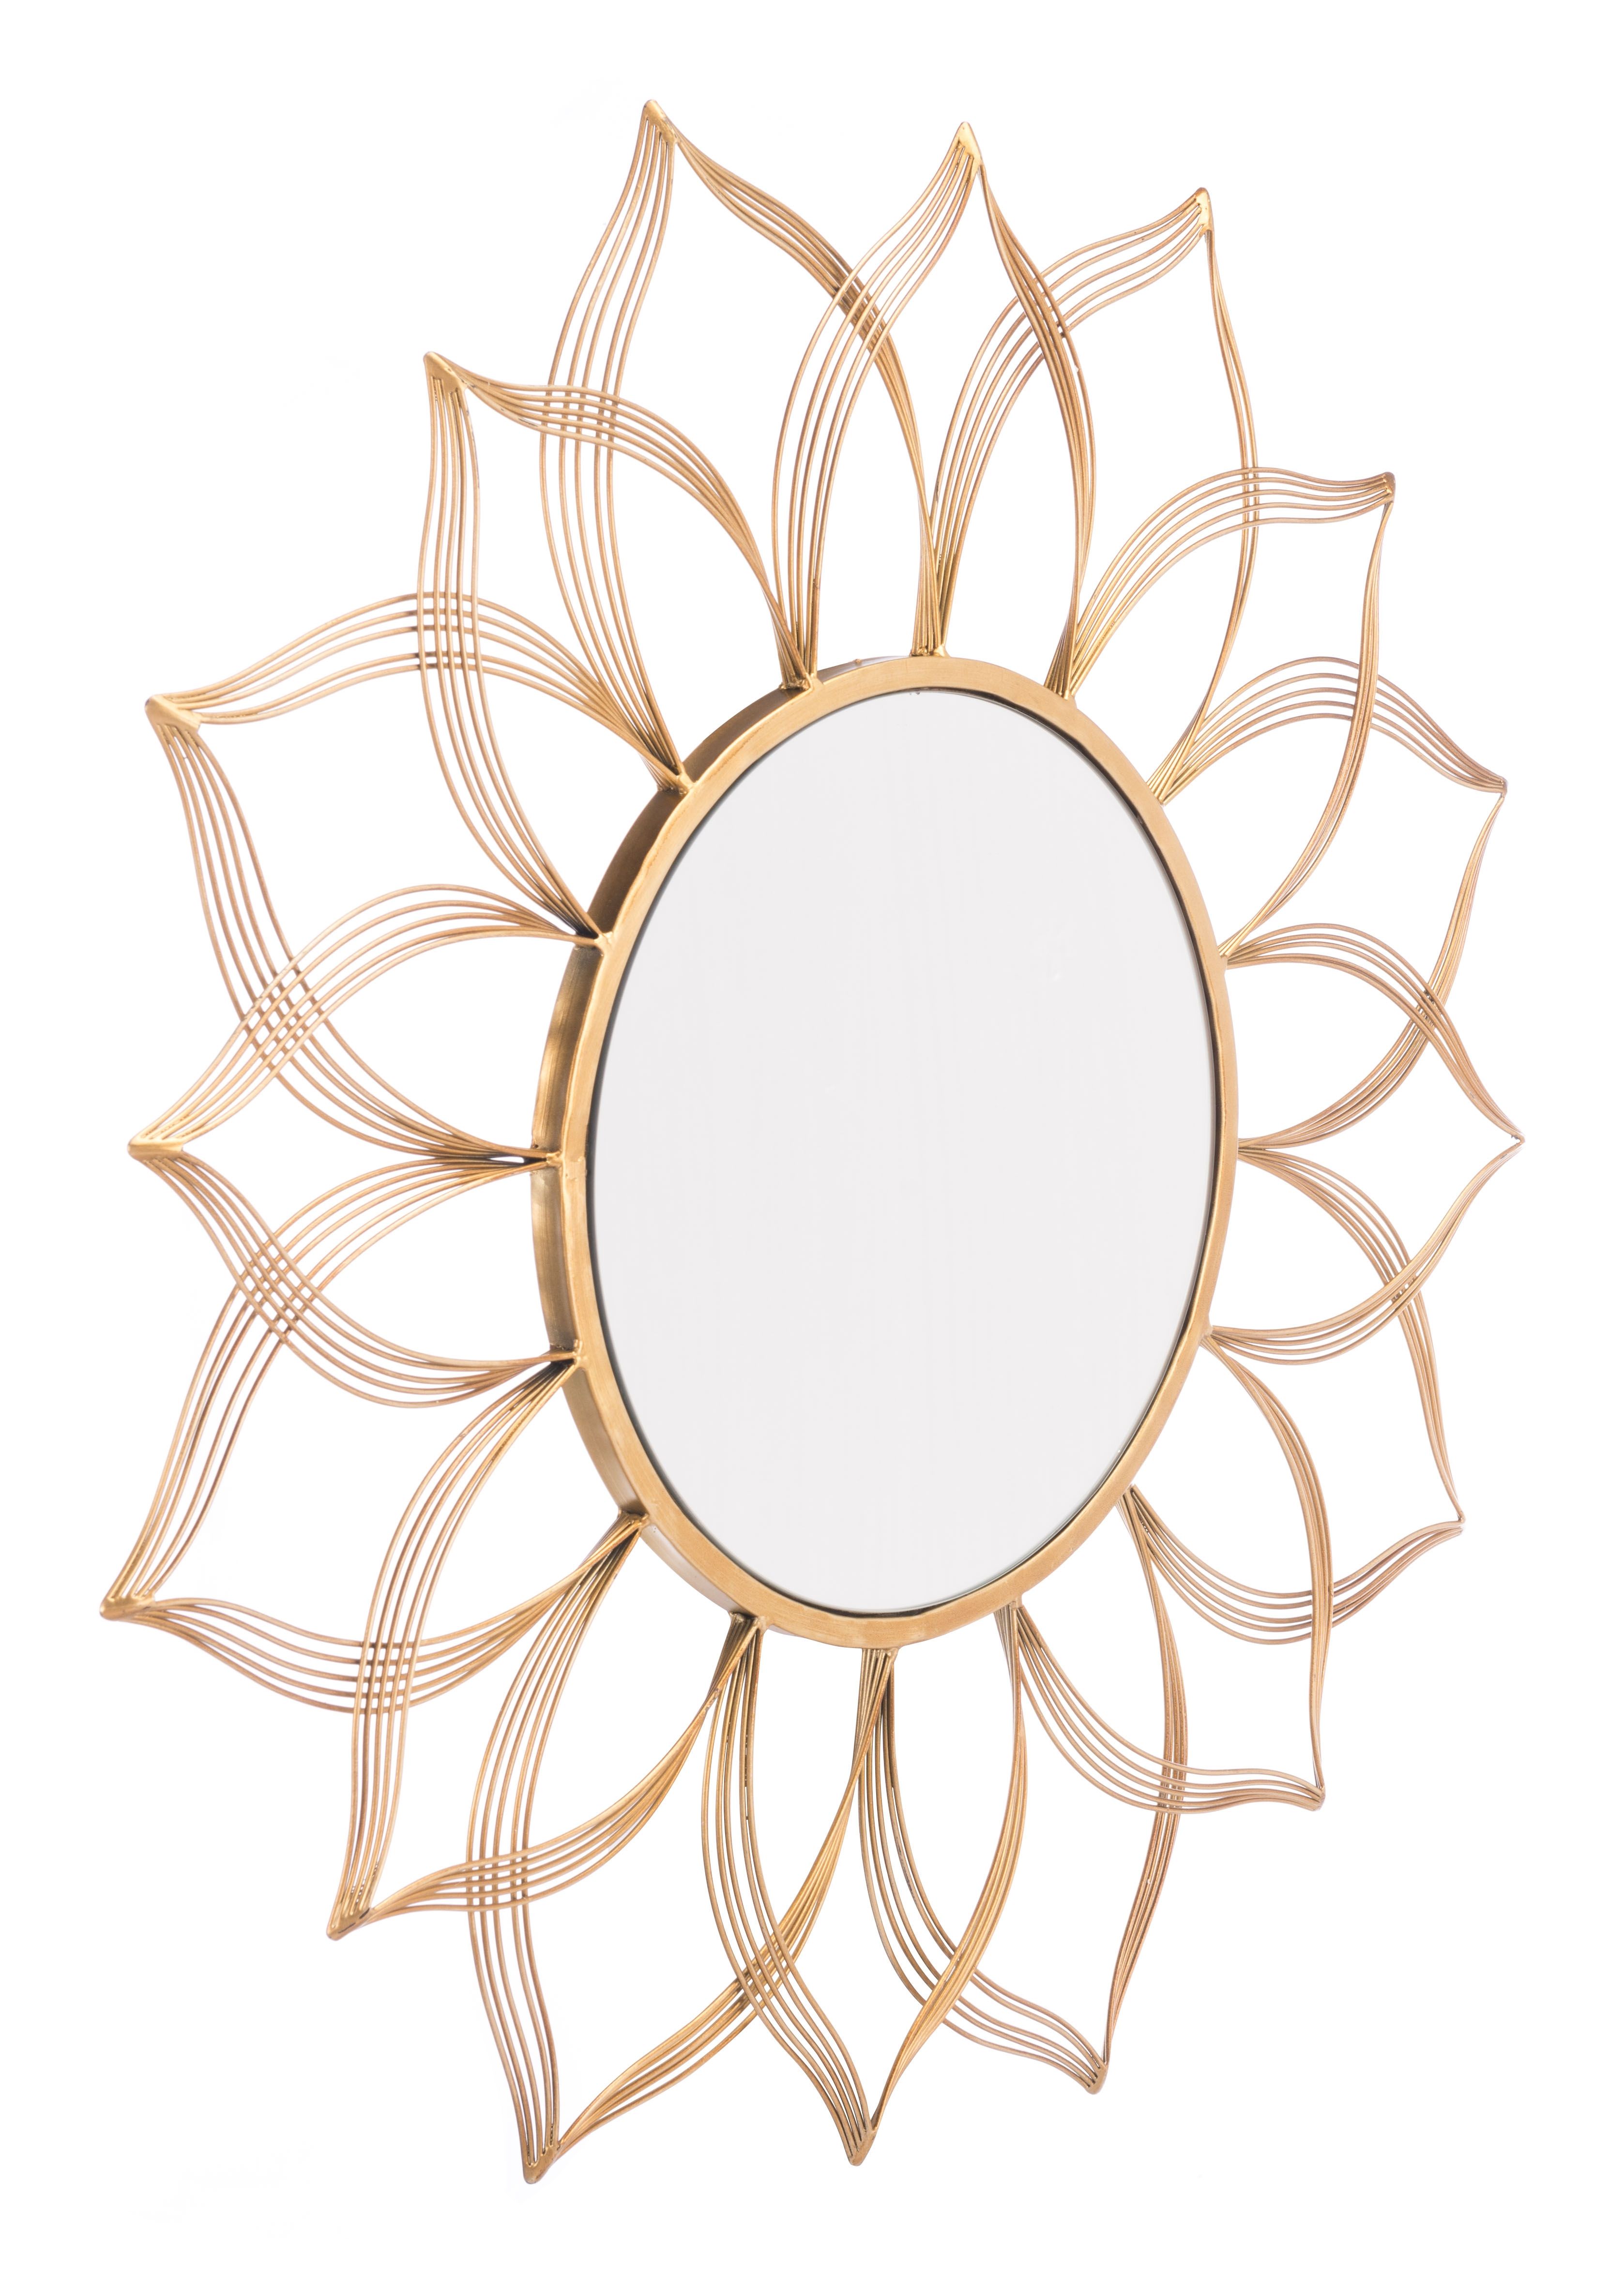 Flor Shaped Wall Mirror, Gold Finish | Products In 2019 Inside Brynn Accent Mirrors (View 27 of 30)